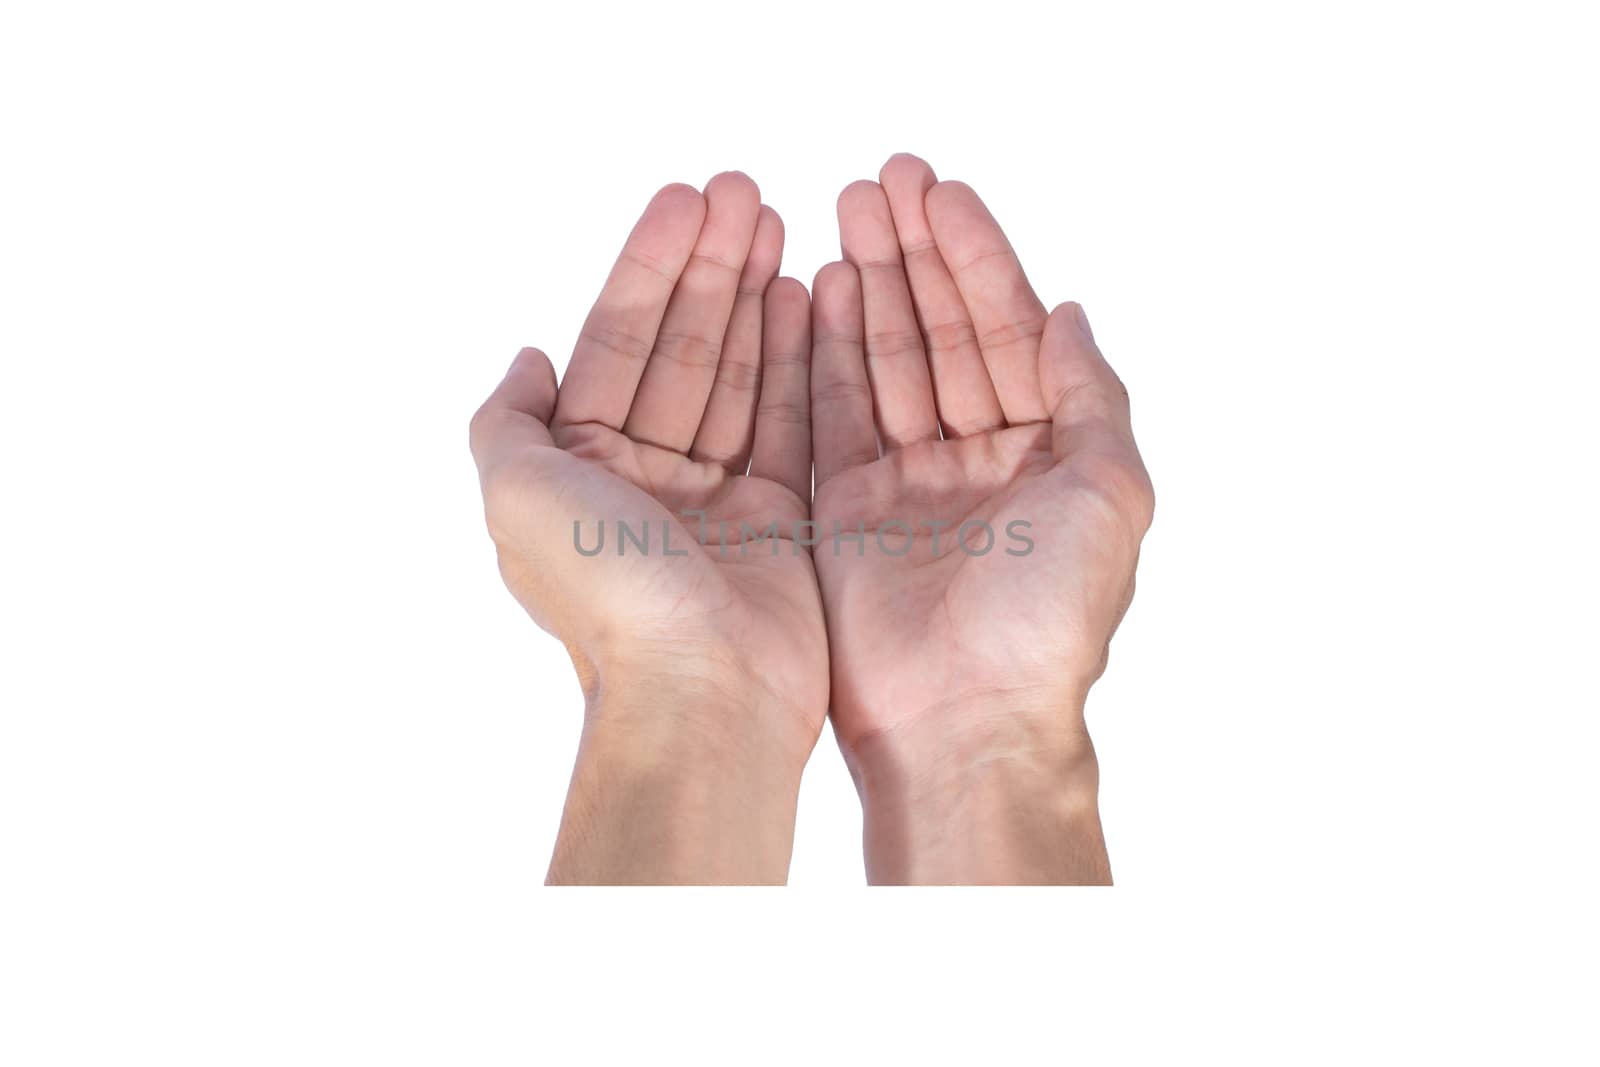 The human hand in the white background